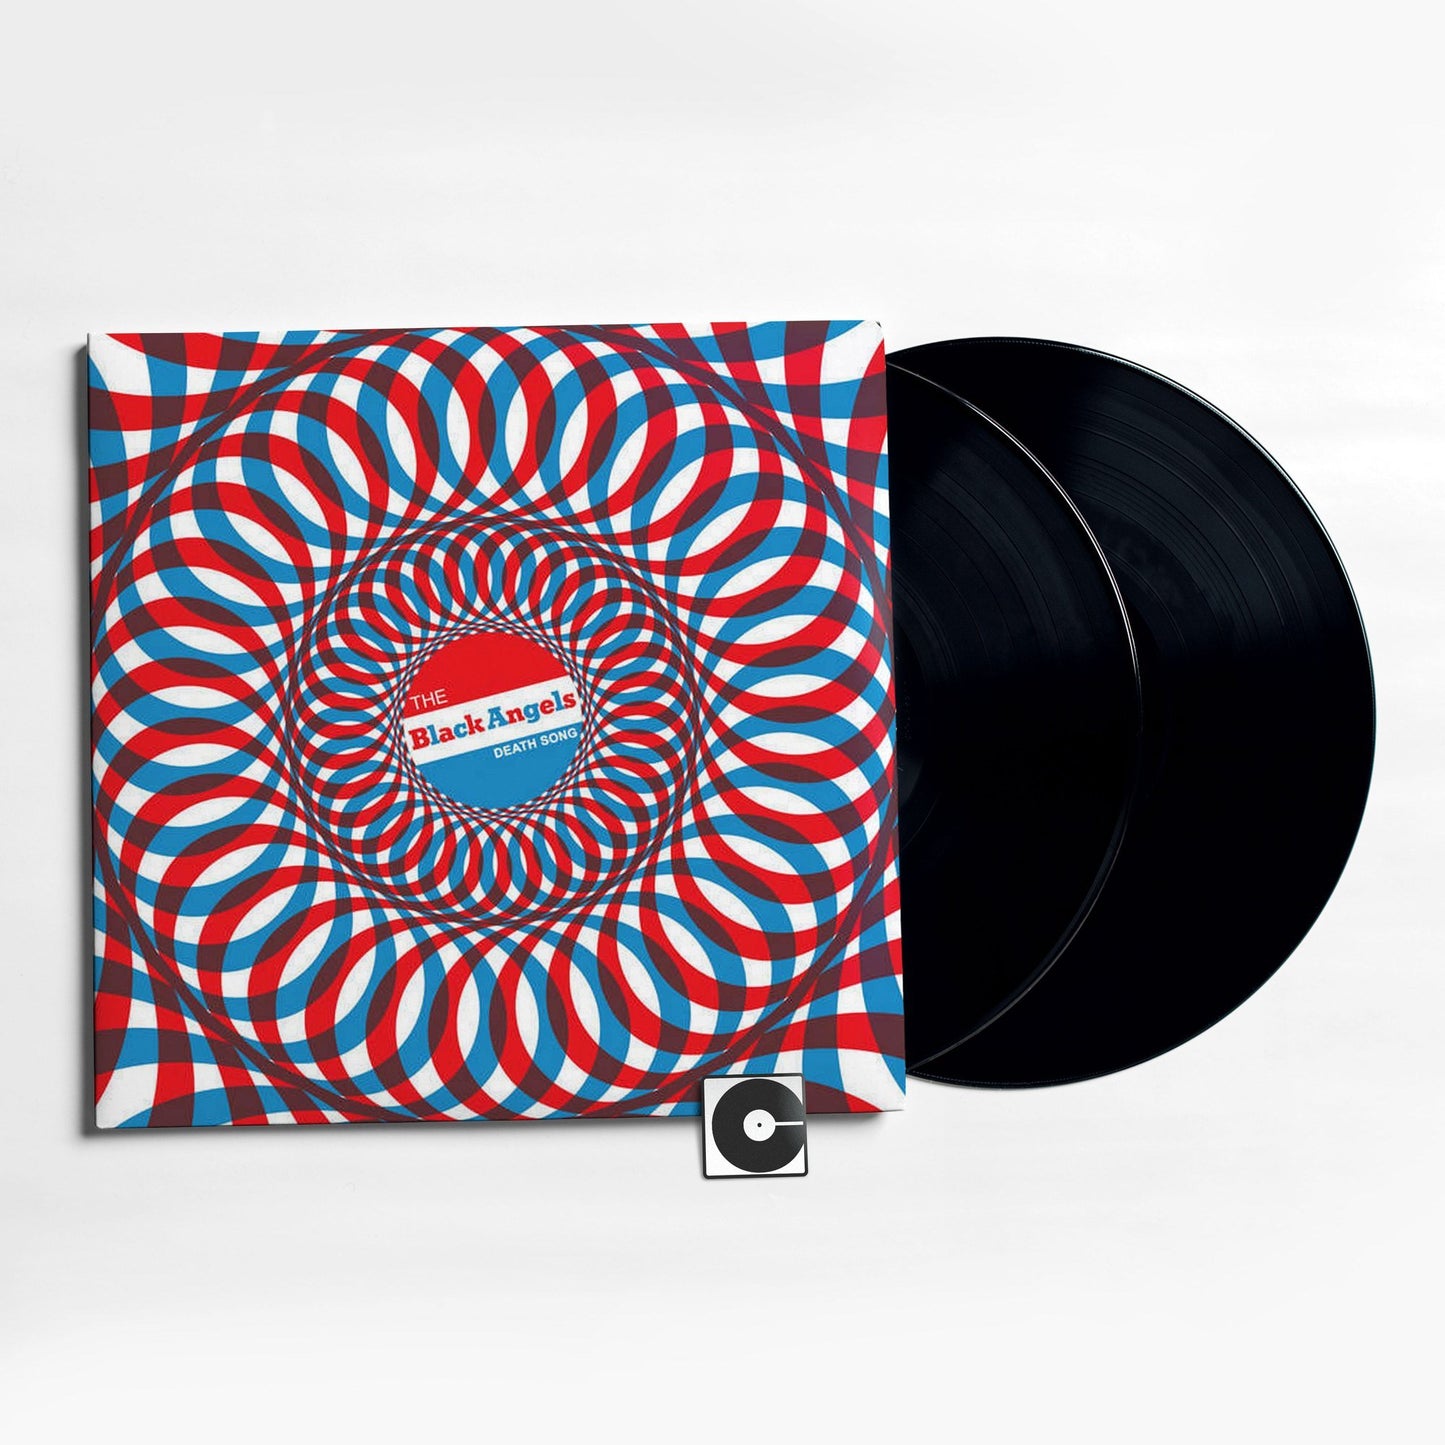 The Black Angels - "Death Song"